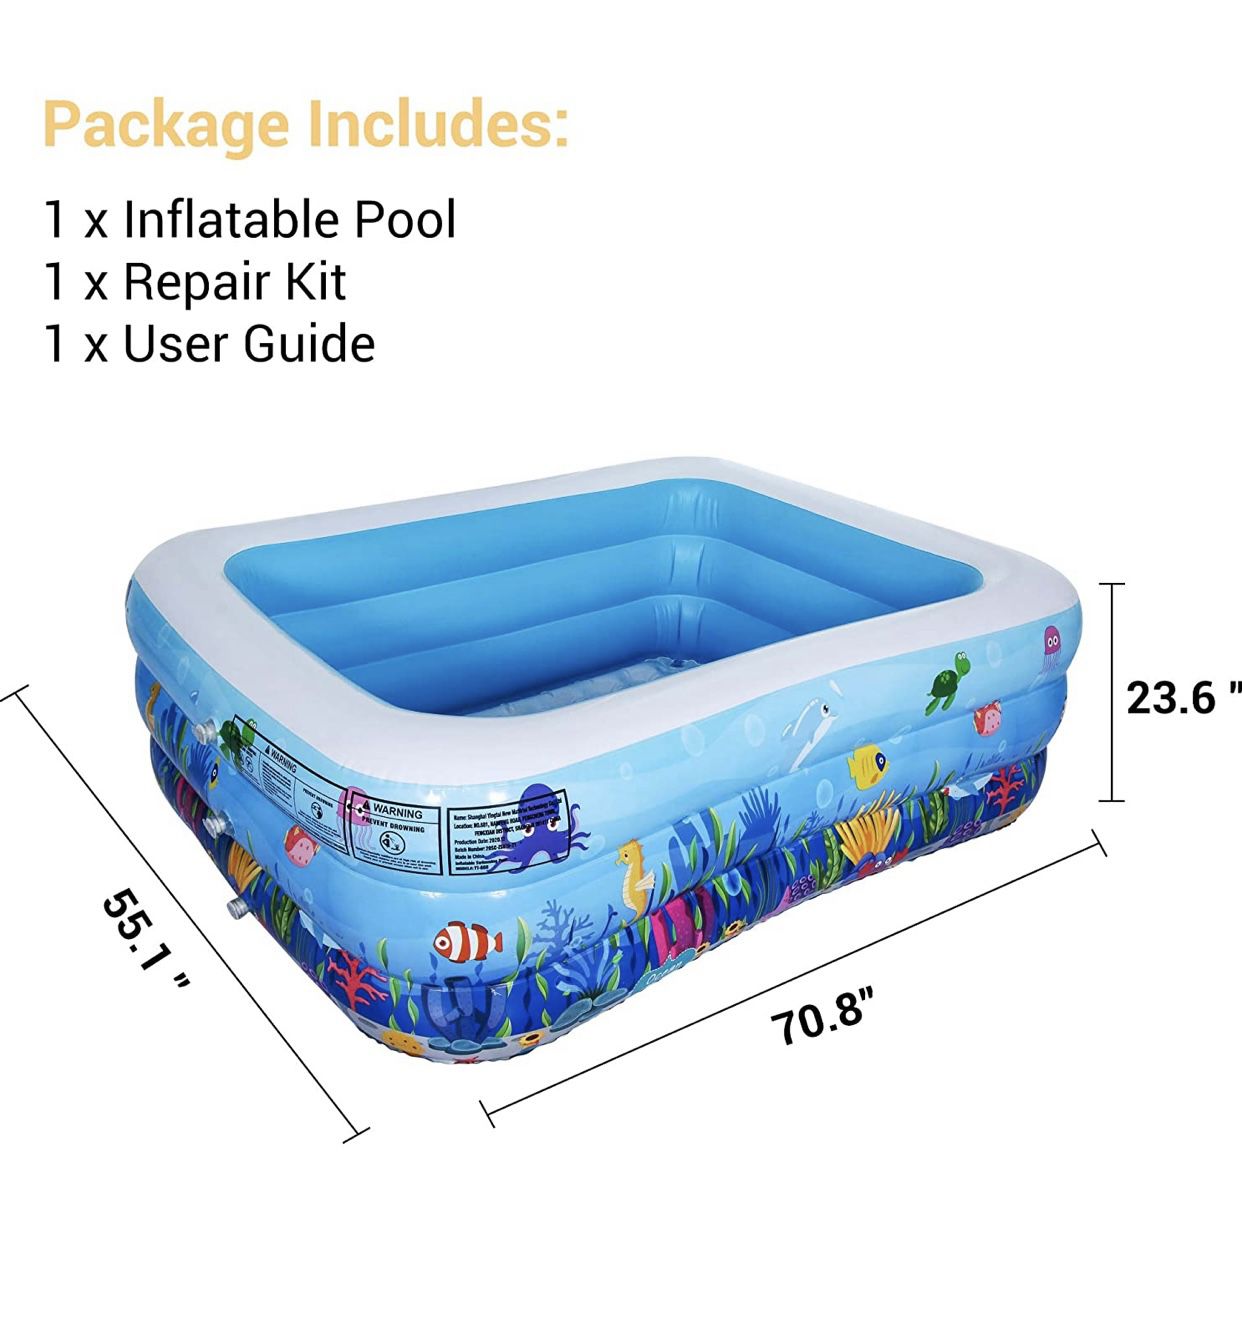 Inflatable Swimming Pool 70.8"x 55.1"x 23.6